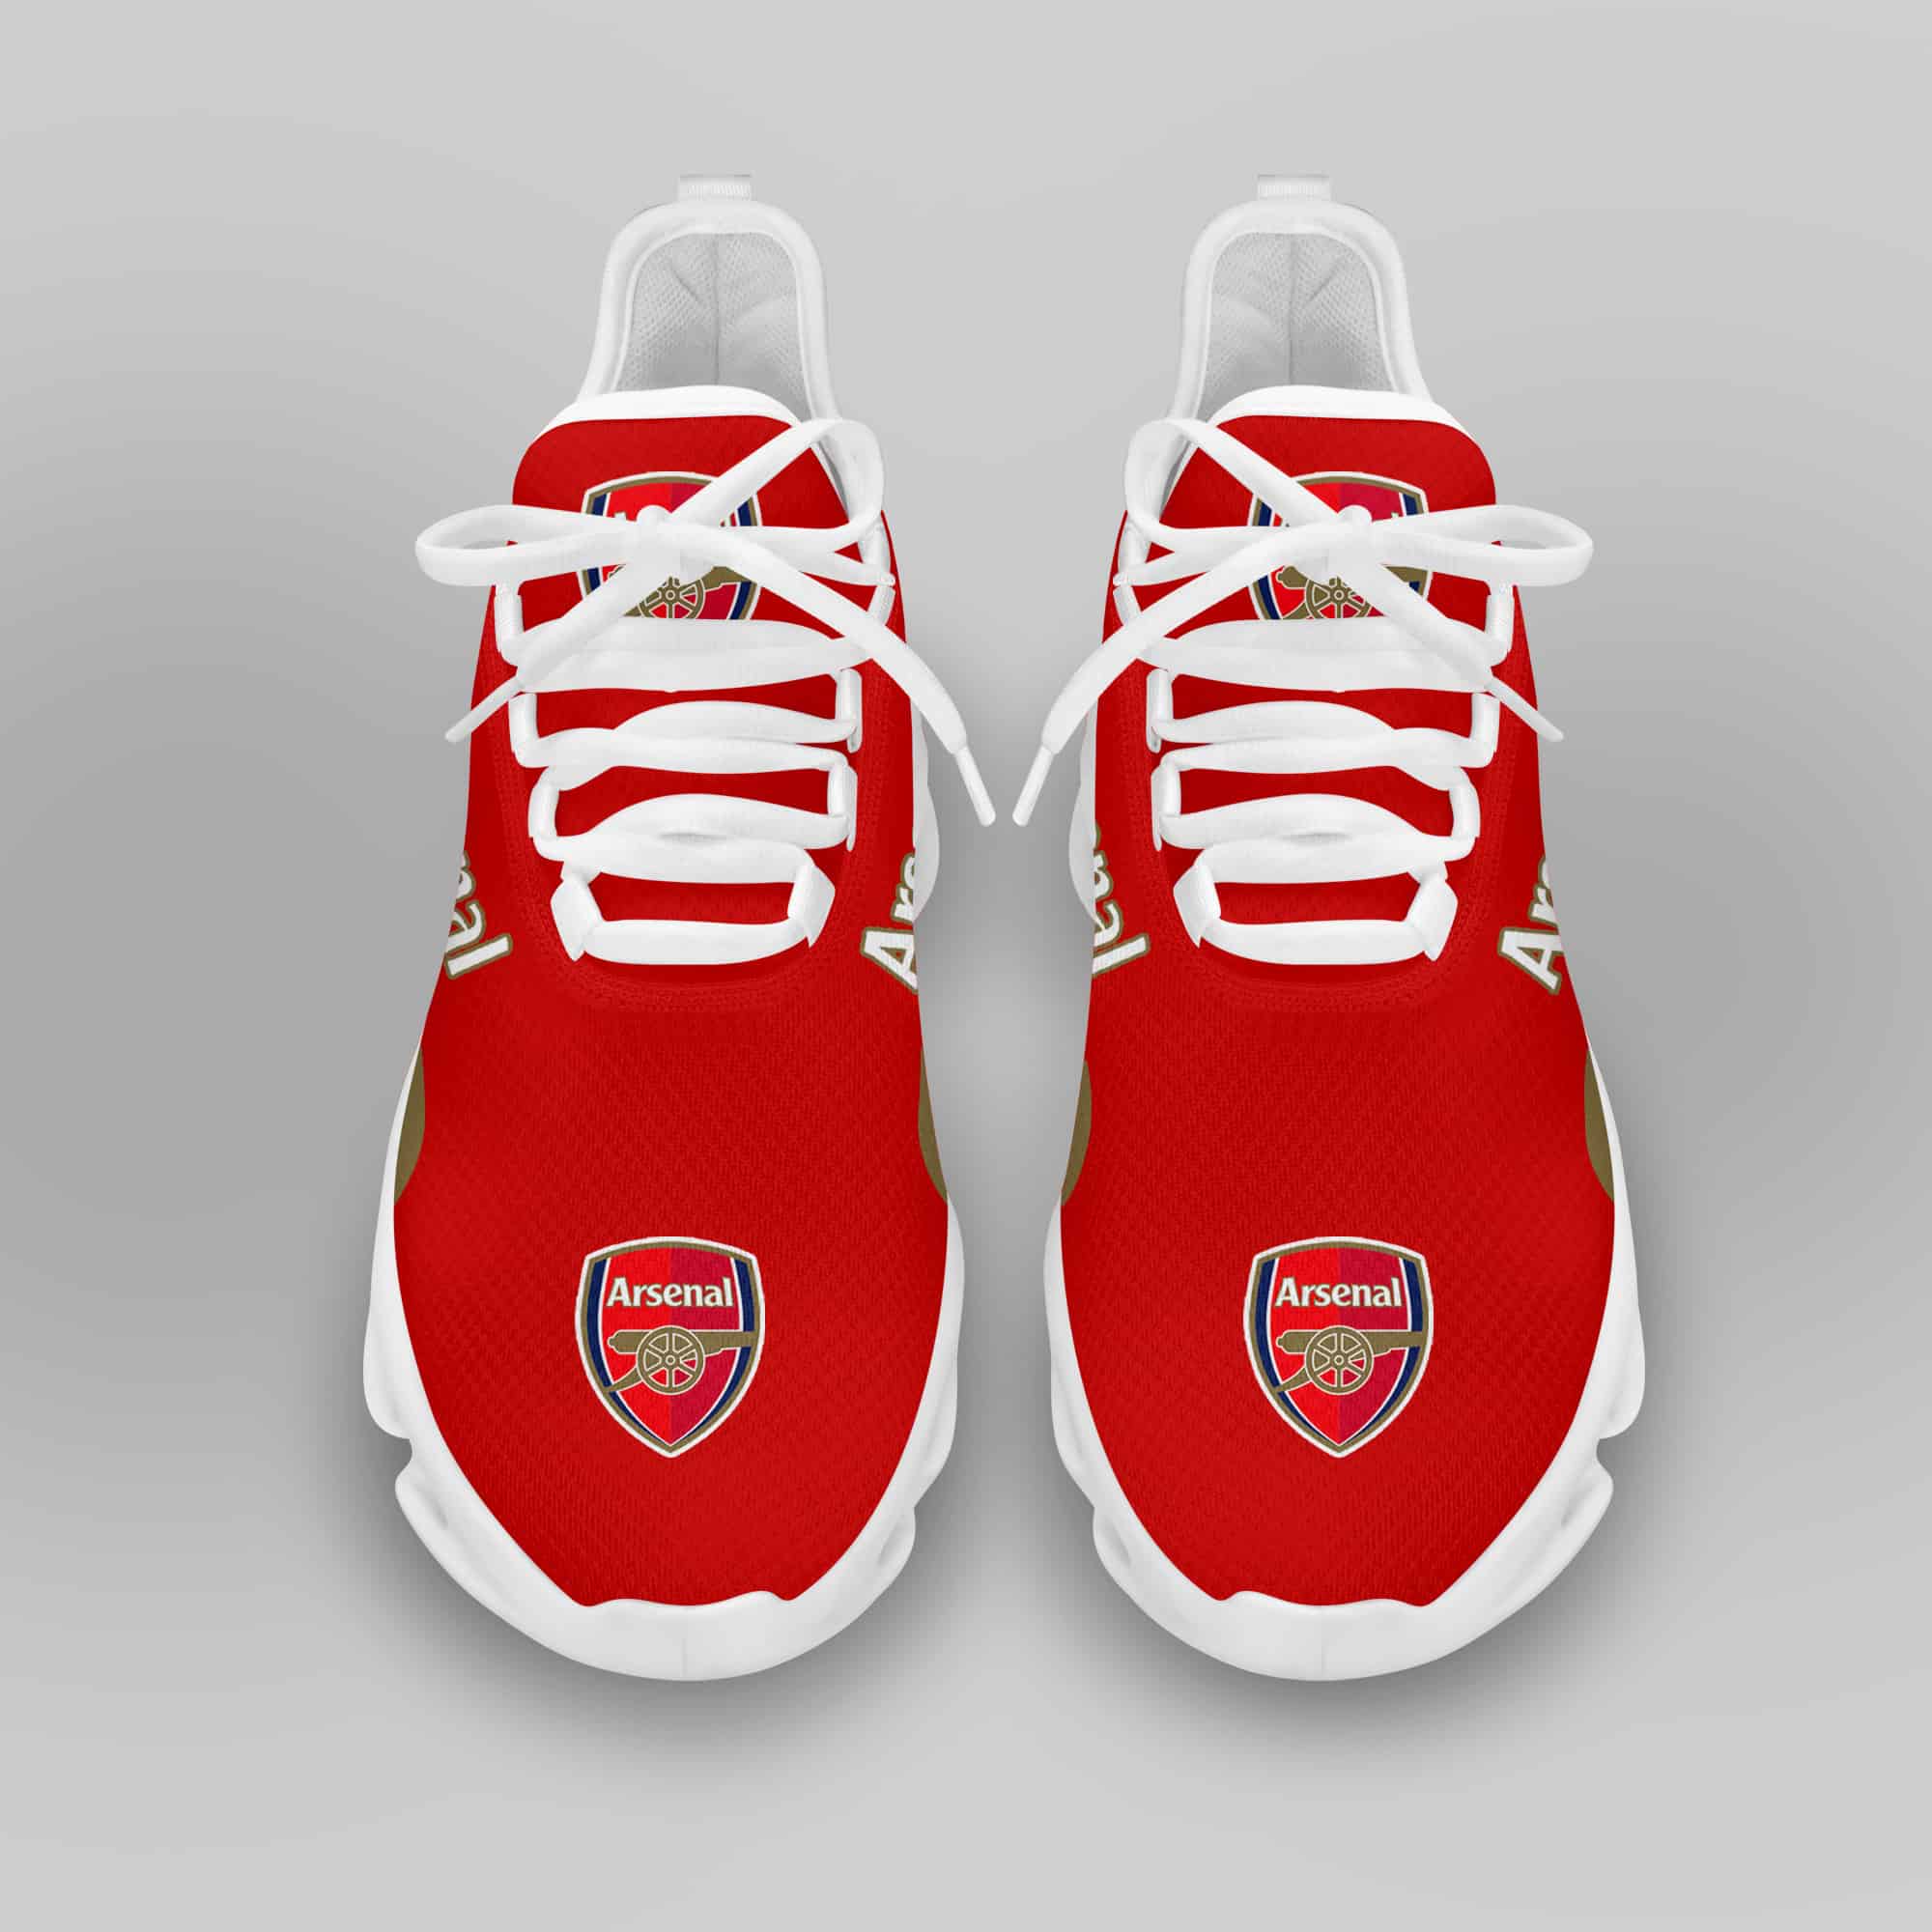 Arsenal Running Shoes Max Soul Shoes Sneakers Ver 4 3